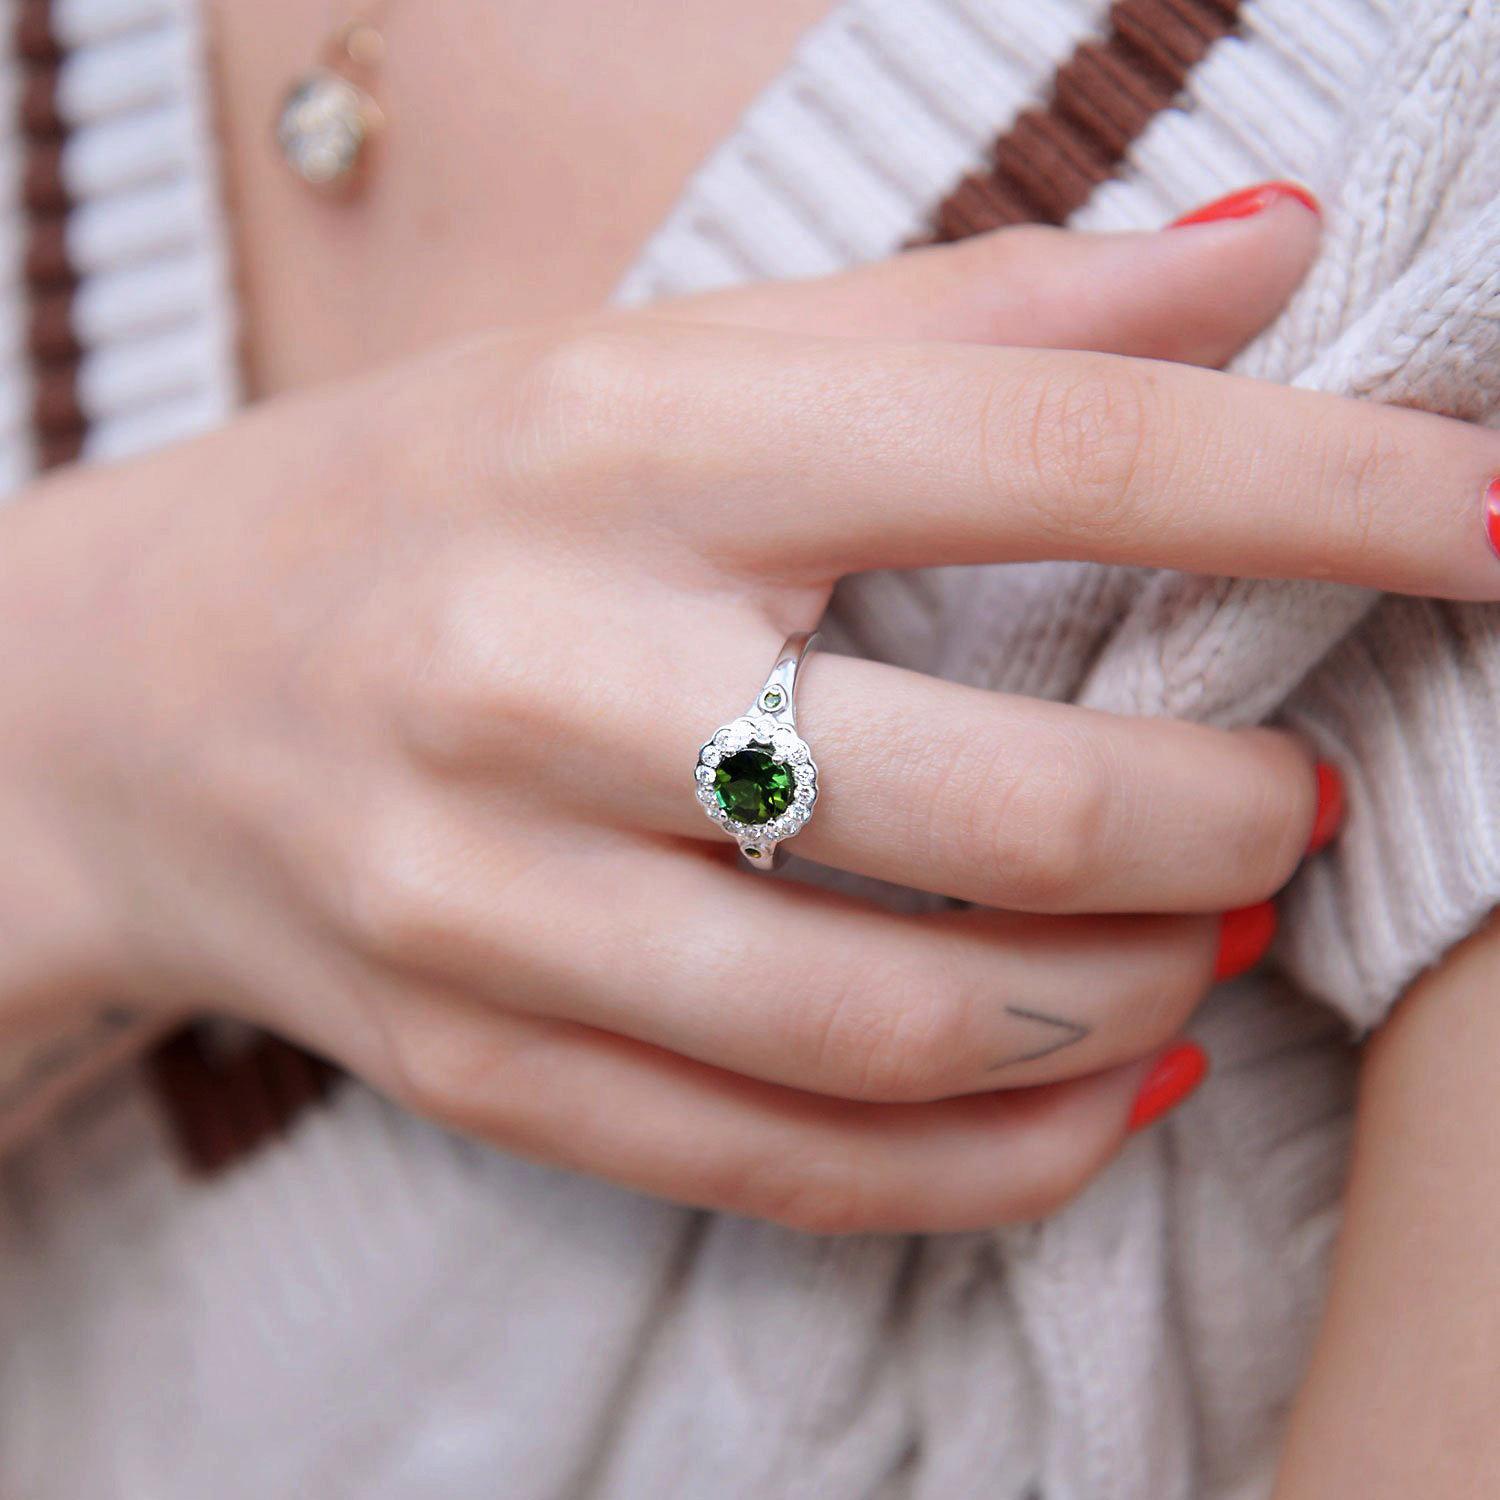 For Sale:  10k White Gold 1ct Natural Green Tourmaline & Diamond '.28t.c.w' Halo Ring 3